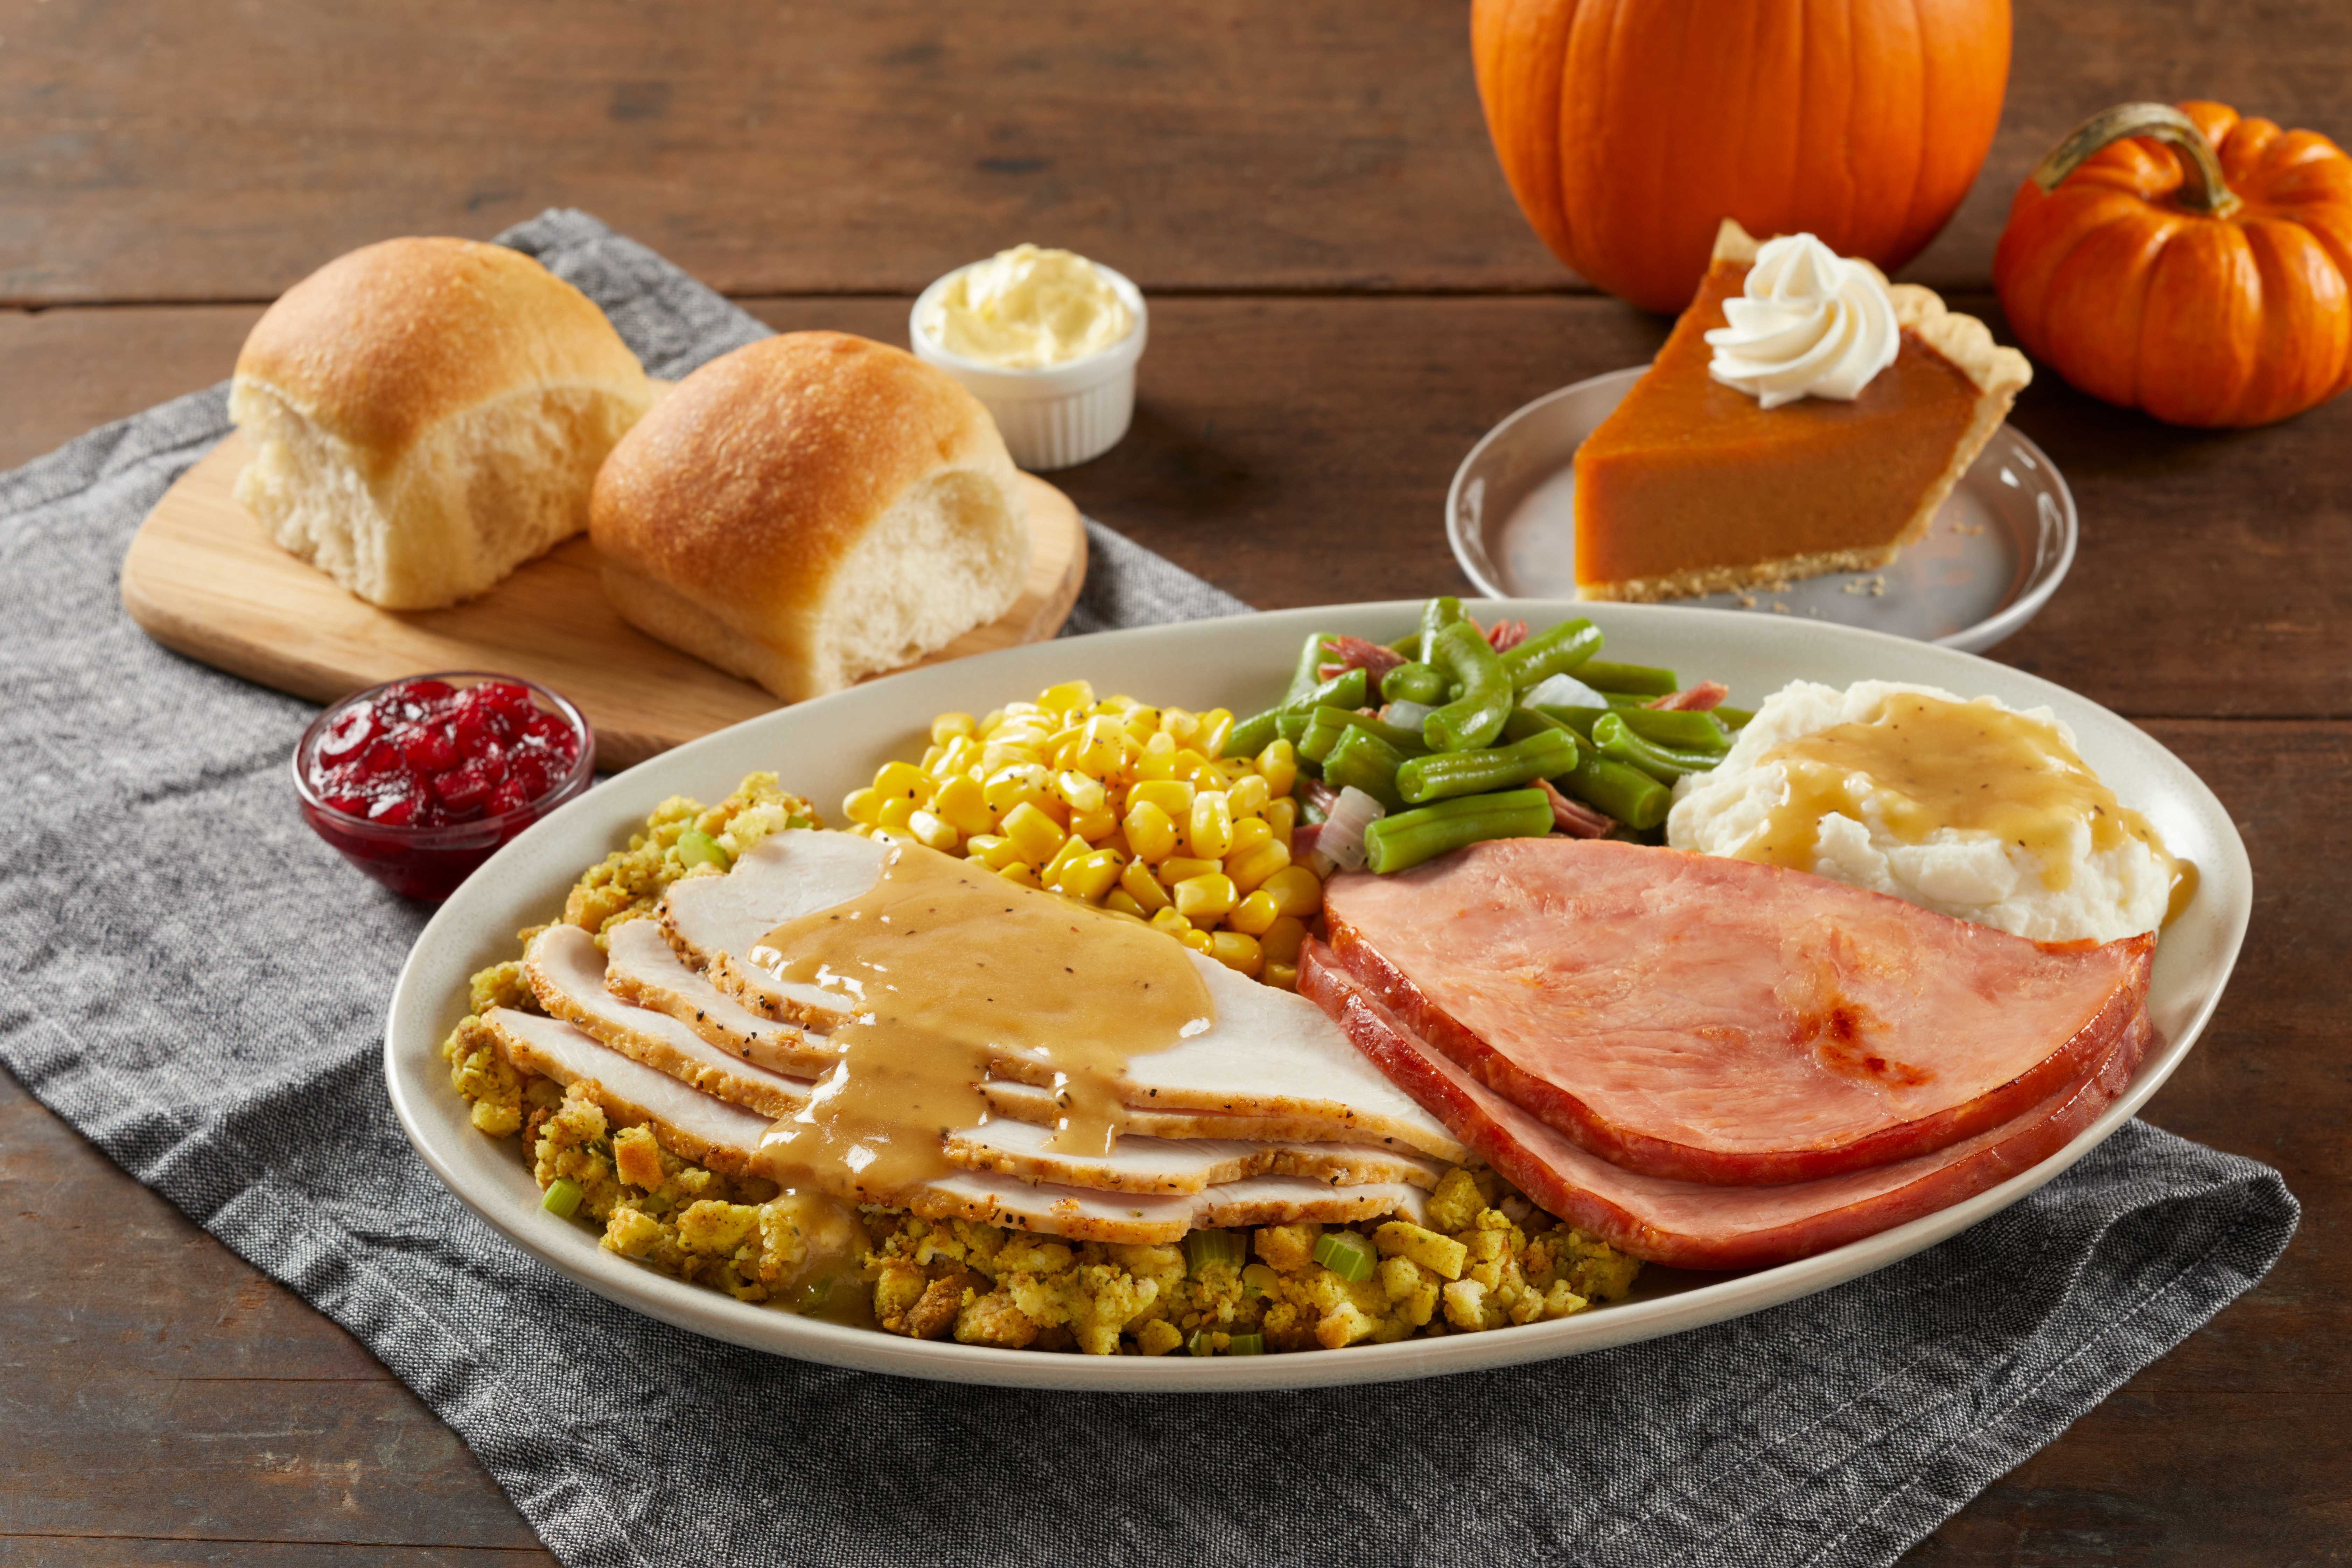 Give Thanks With Bob Evans Homestyle Hugs Program This Thanksgiving